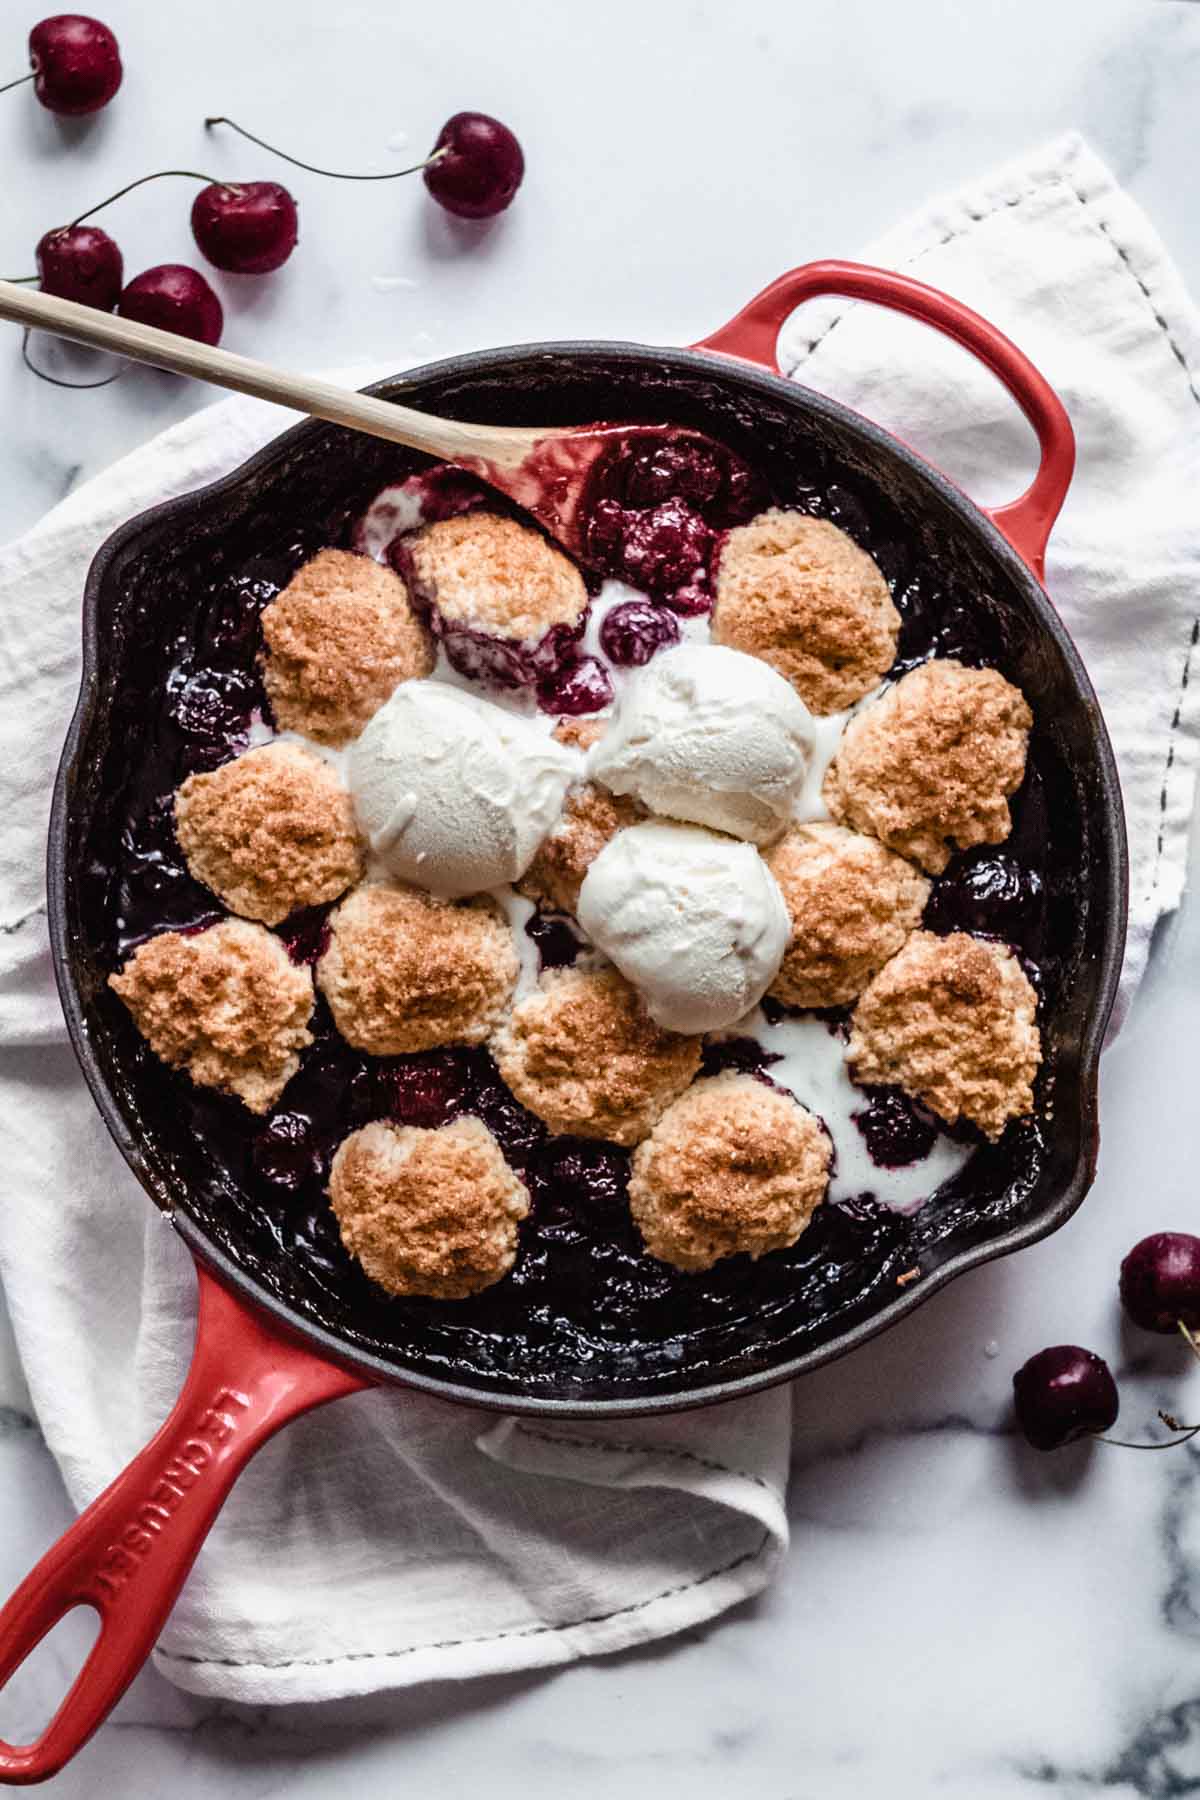 Classic cherry cobbler baked in a skillet - Katiebird Bakes